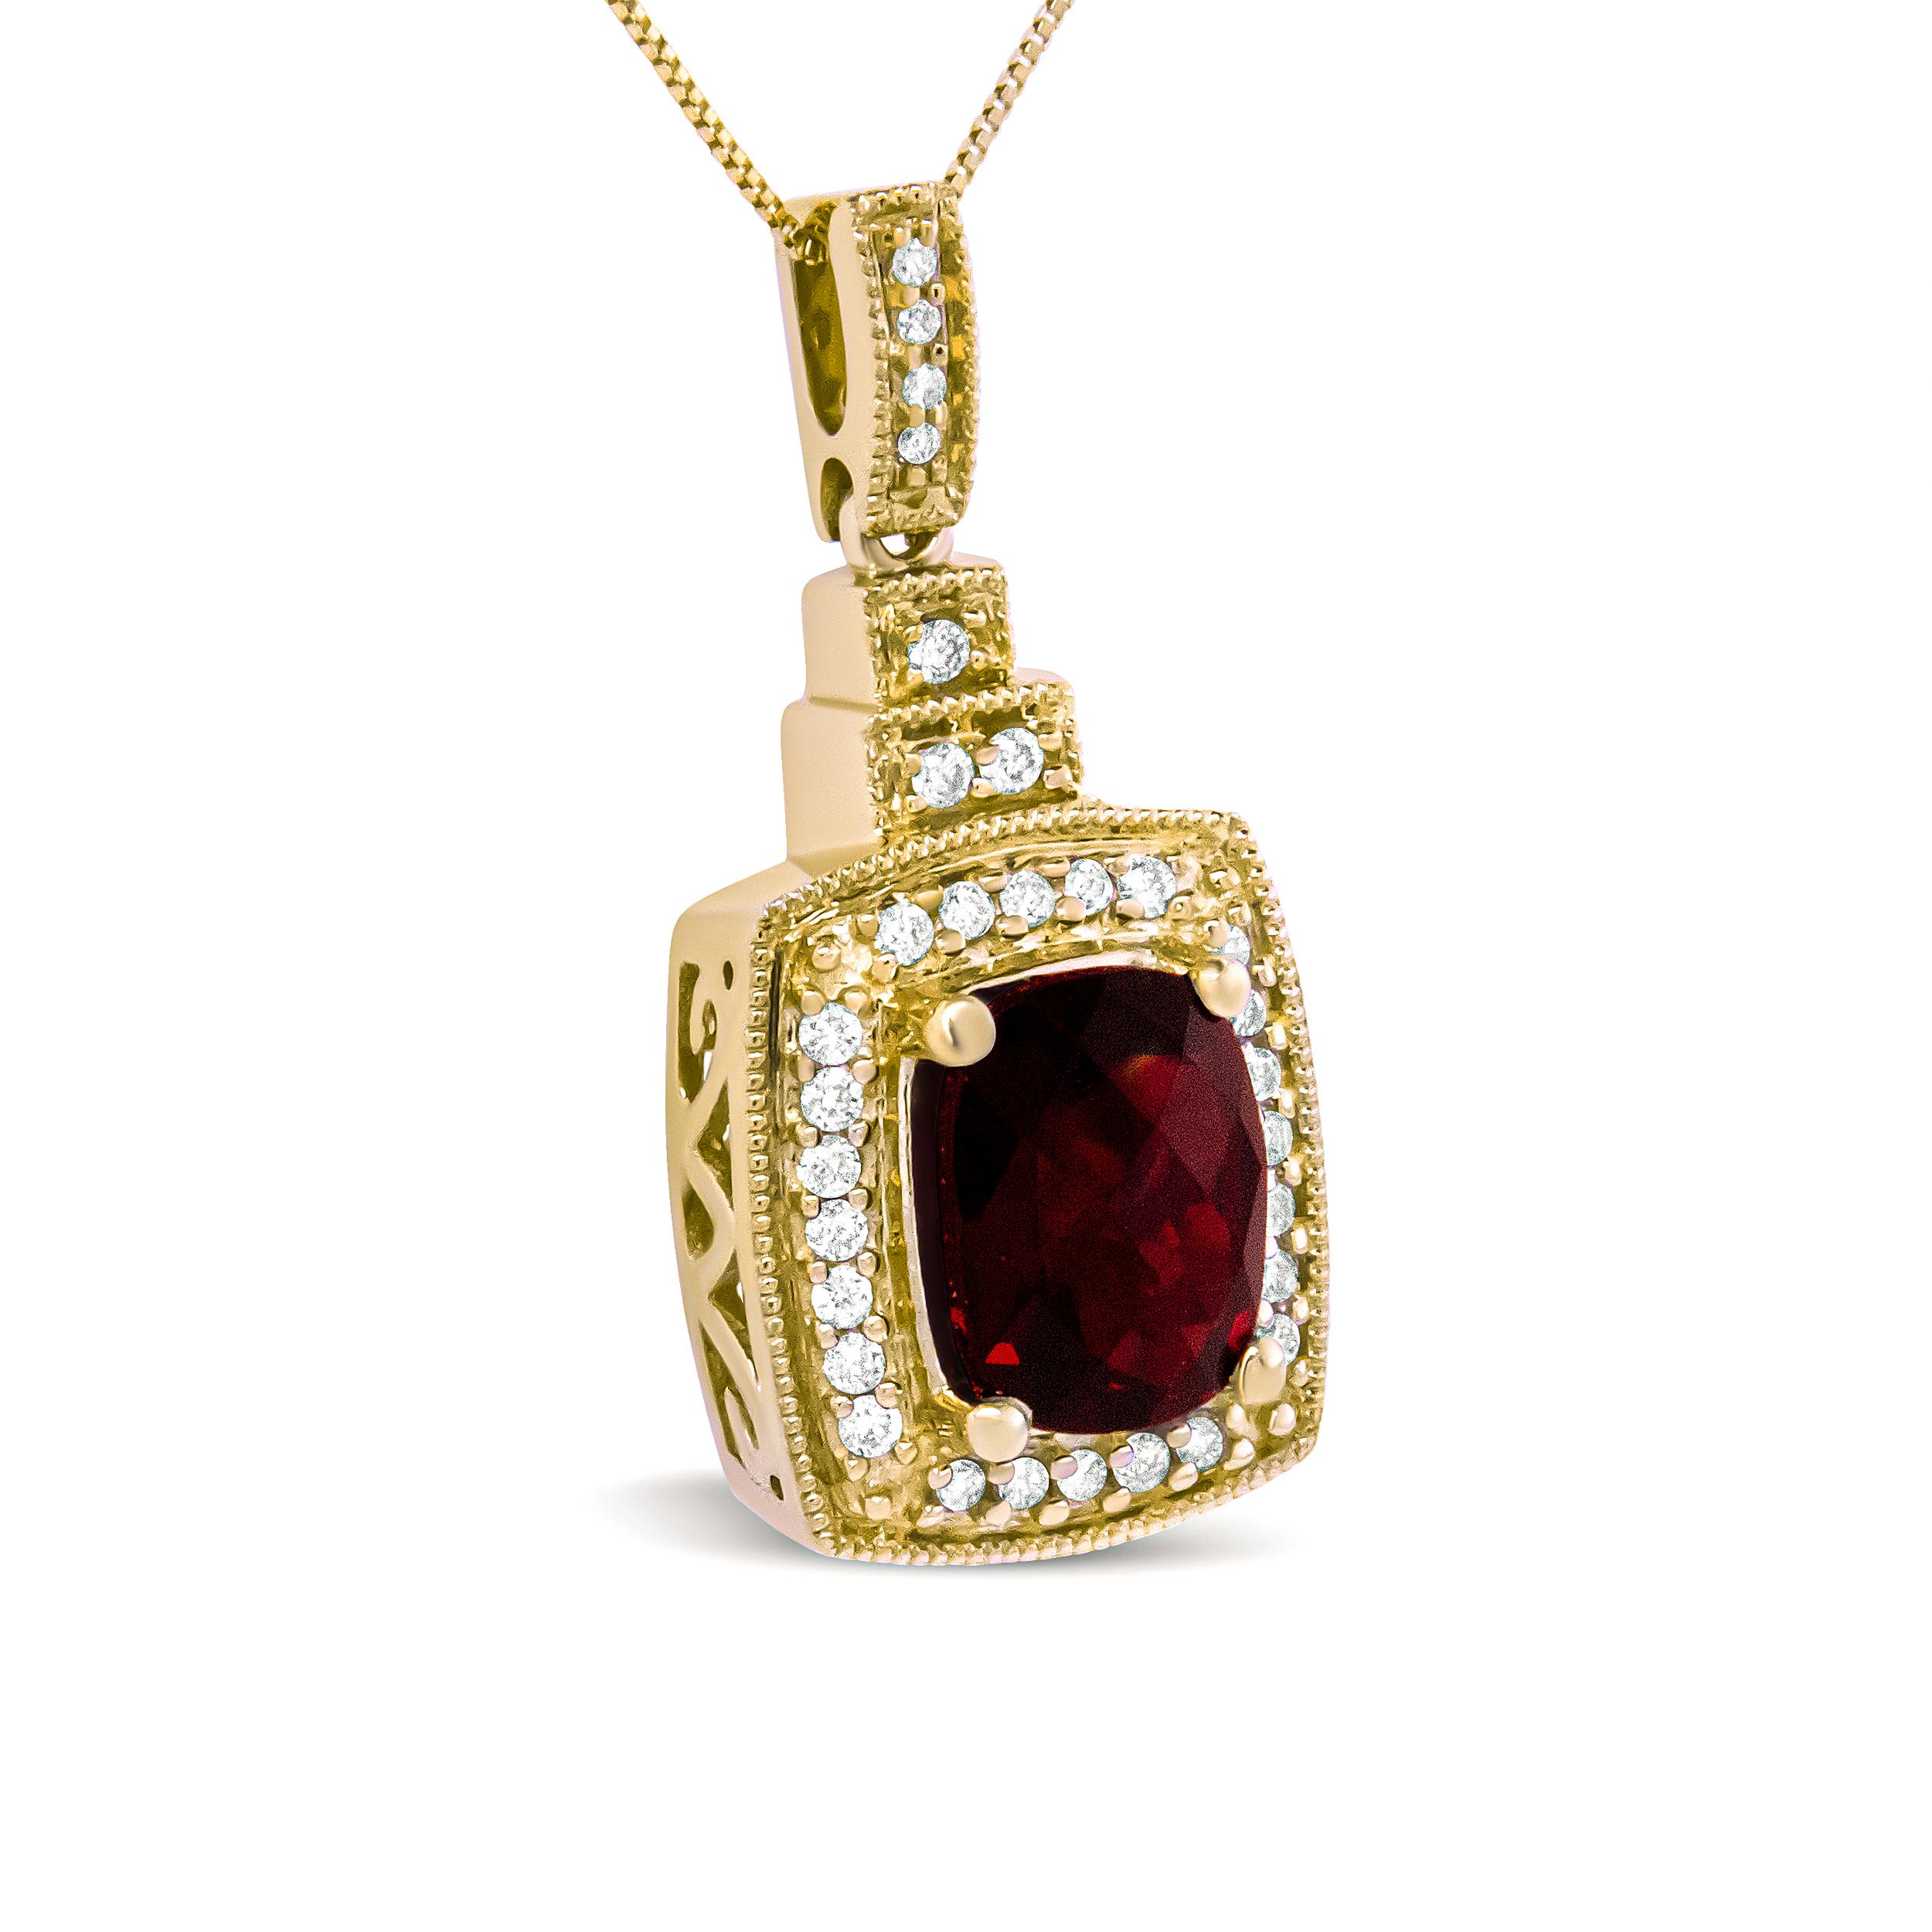 Introducing an exquisite pendant necklace that radiates elegance and sophistication, showcasing a captivating red garnet as its crowning jewel. Set in lustrous 14k yellow gold, the 9x7mm cushion-shaped, checkerboard-cut garnet steals the spotlight